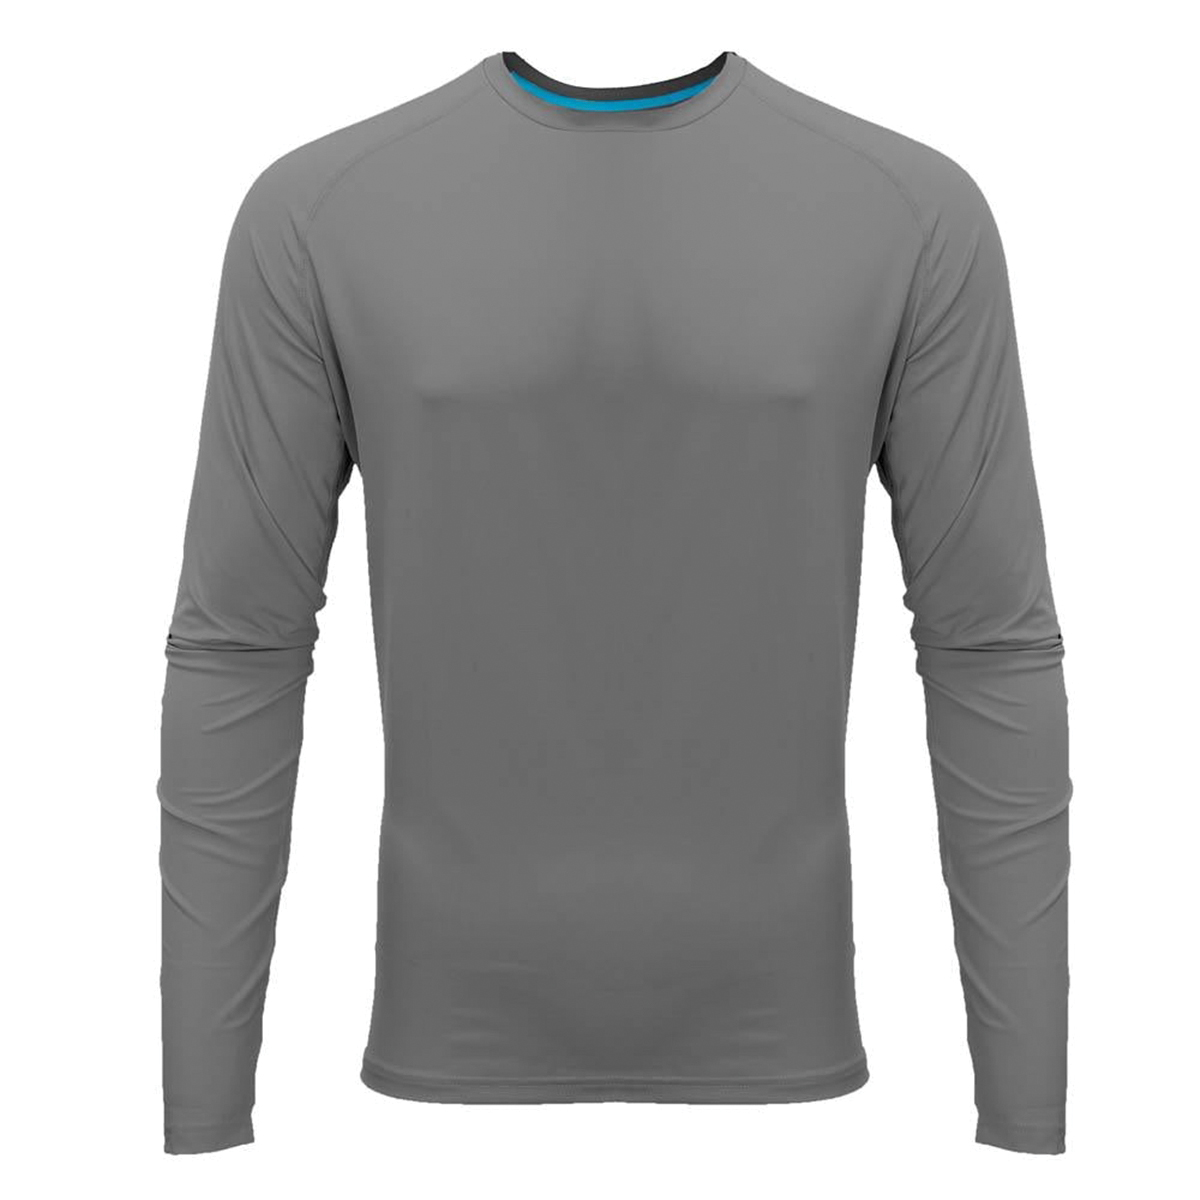 Mobile Cooling Series MCMT05340621 Shirt, 2XL, Polyester/Spandex, Morel, Crew Neck Collar, Athletic Fit